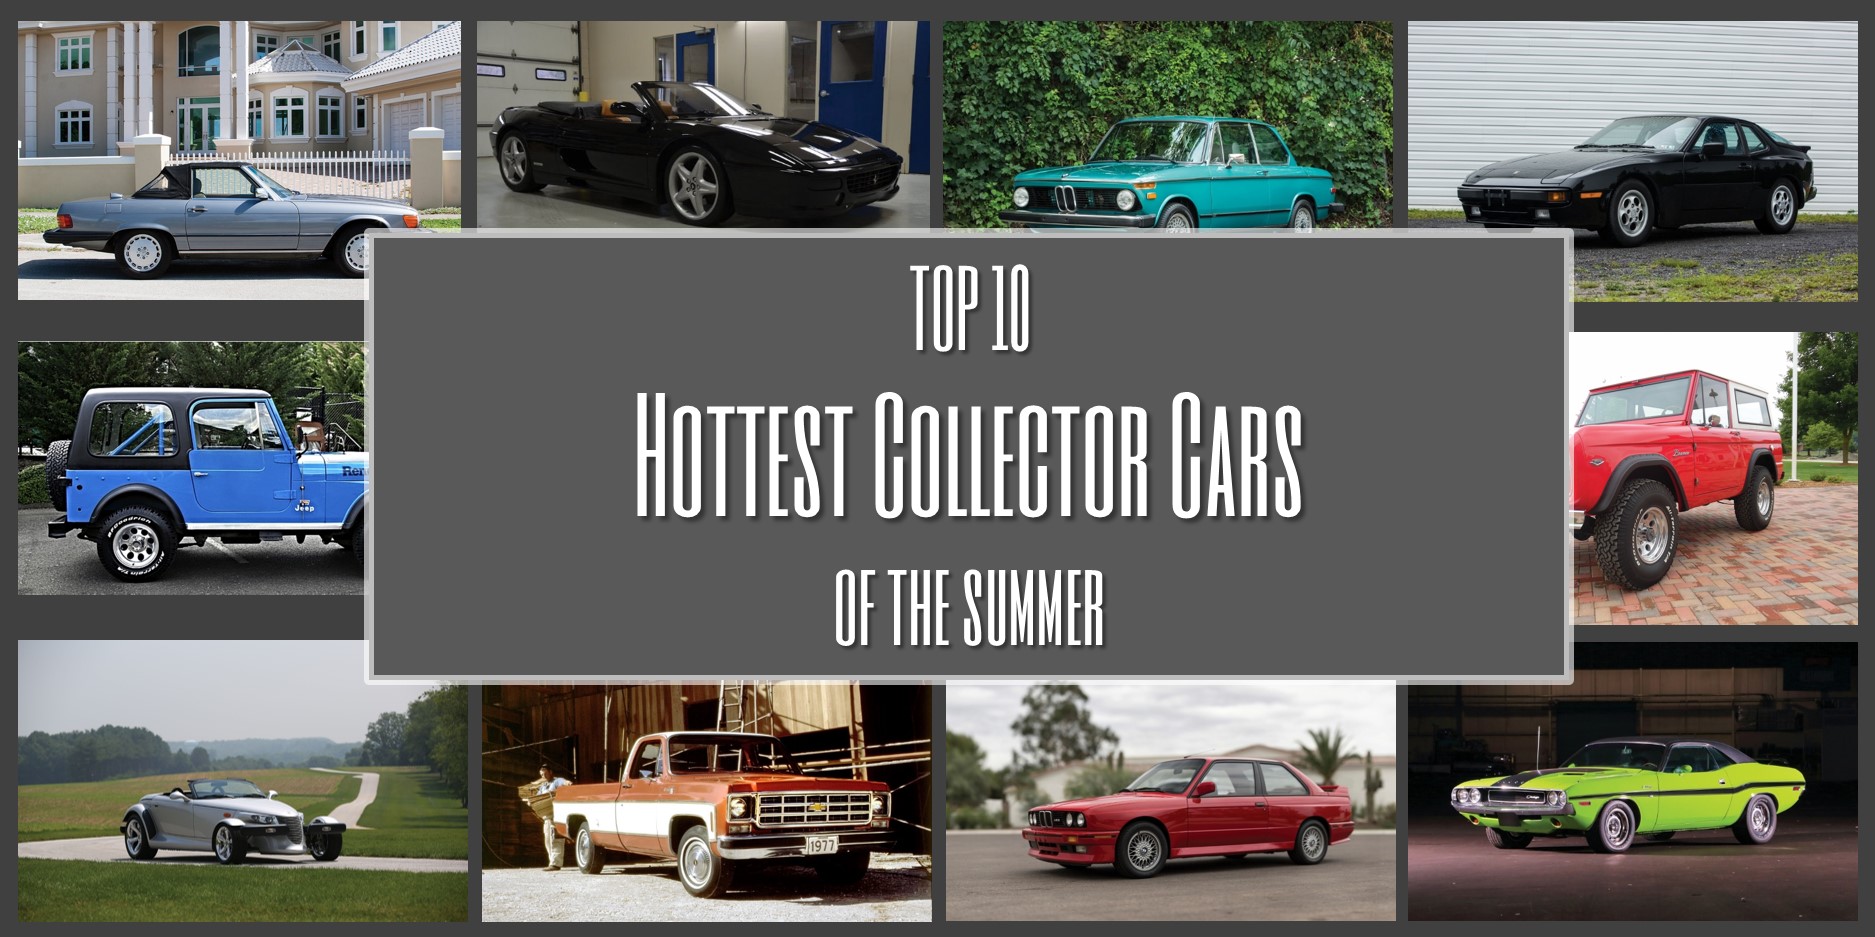 Top 10 Hottest Collector Cars of the Summer